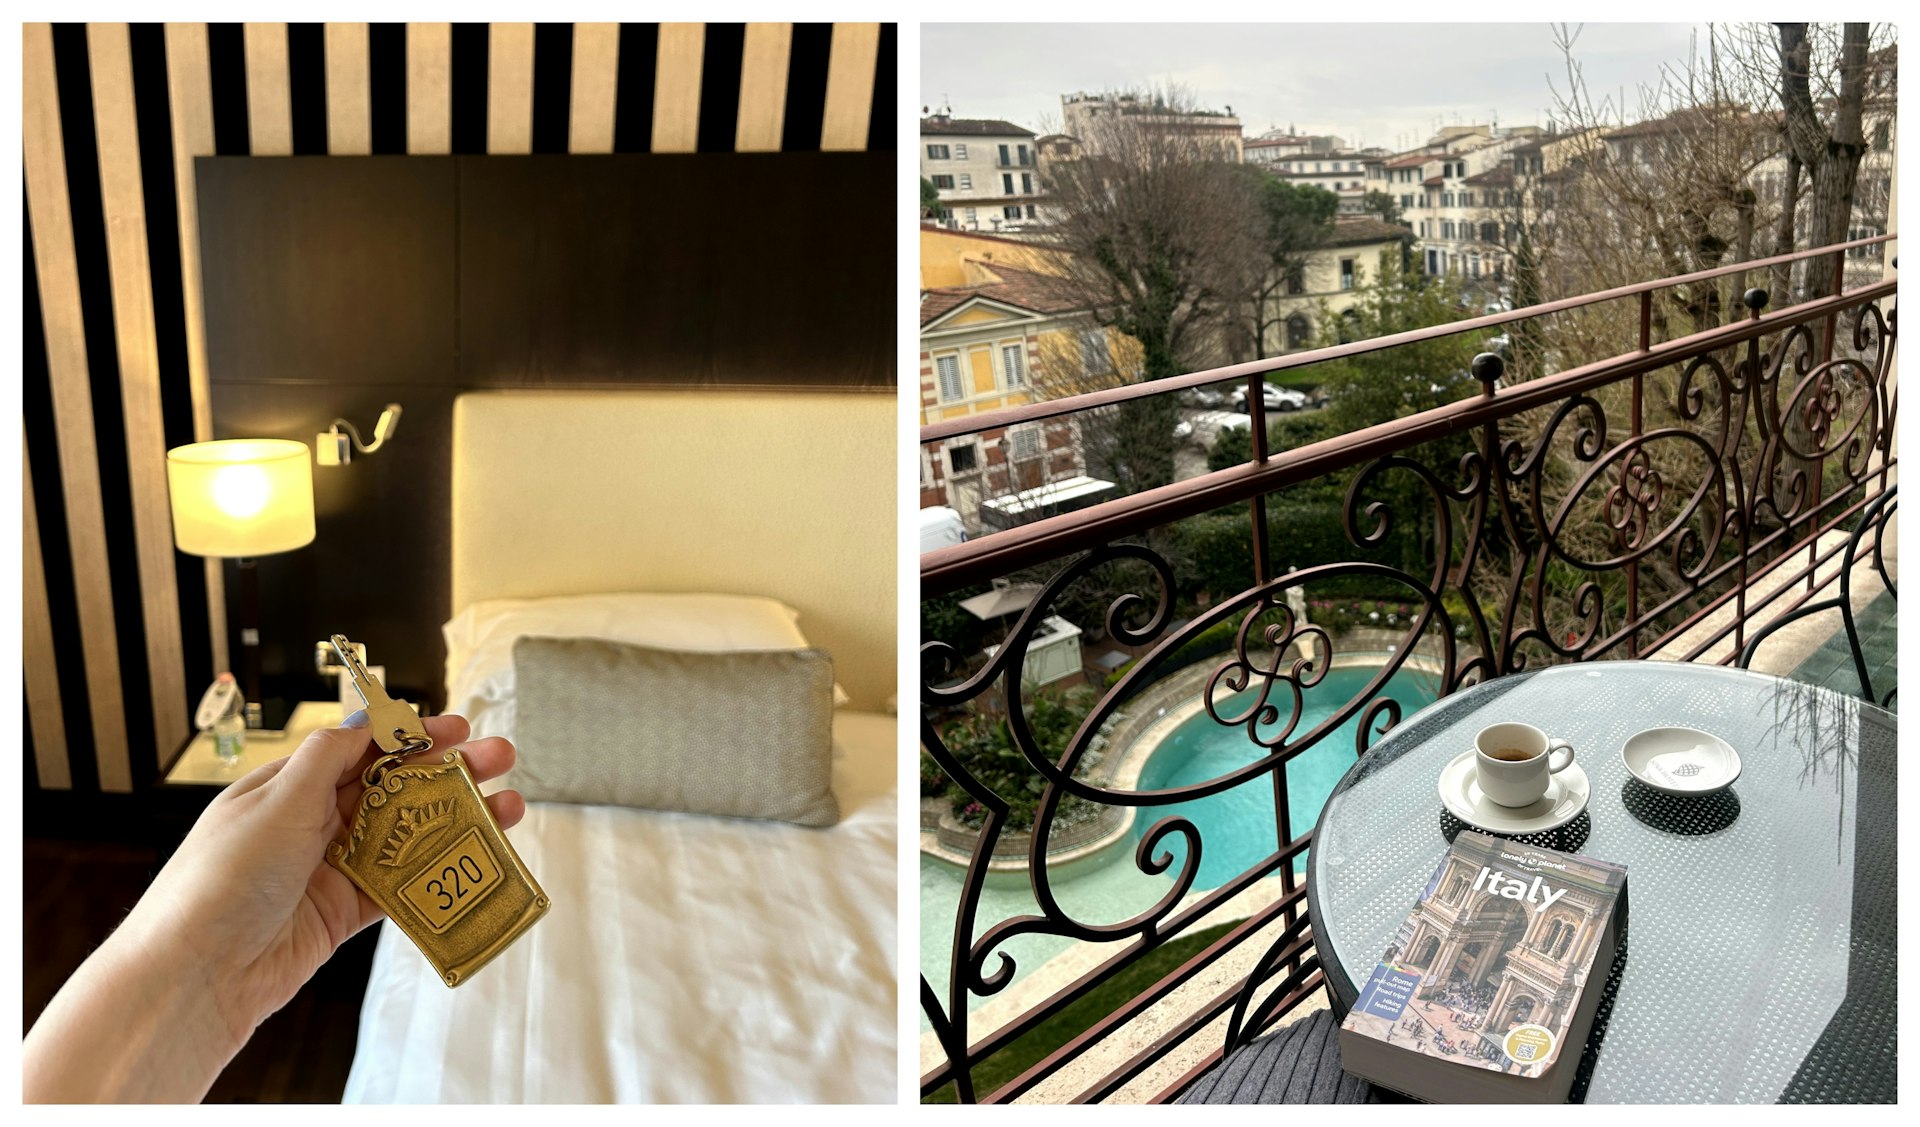 L: holding a hotel room key in front of the bed; R: A view of the hotel pool from a room balcony